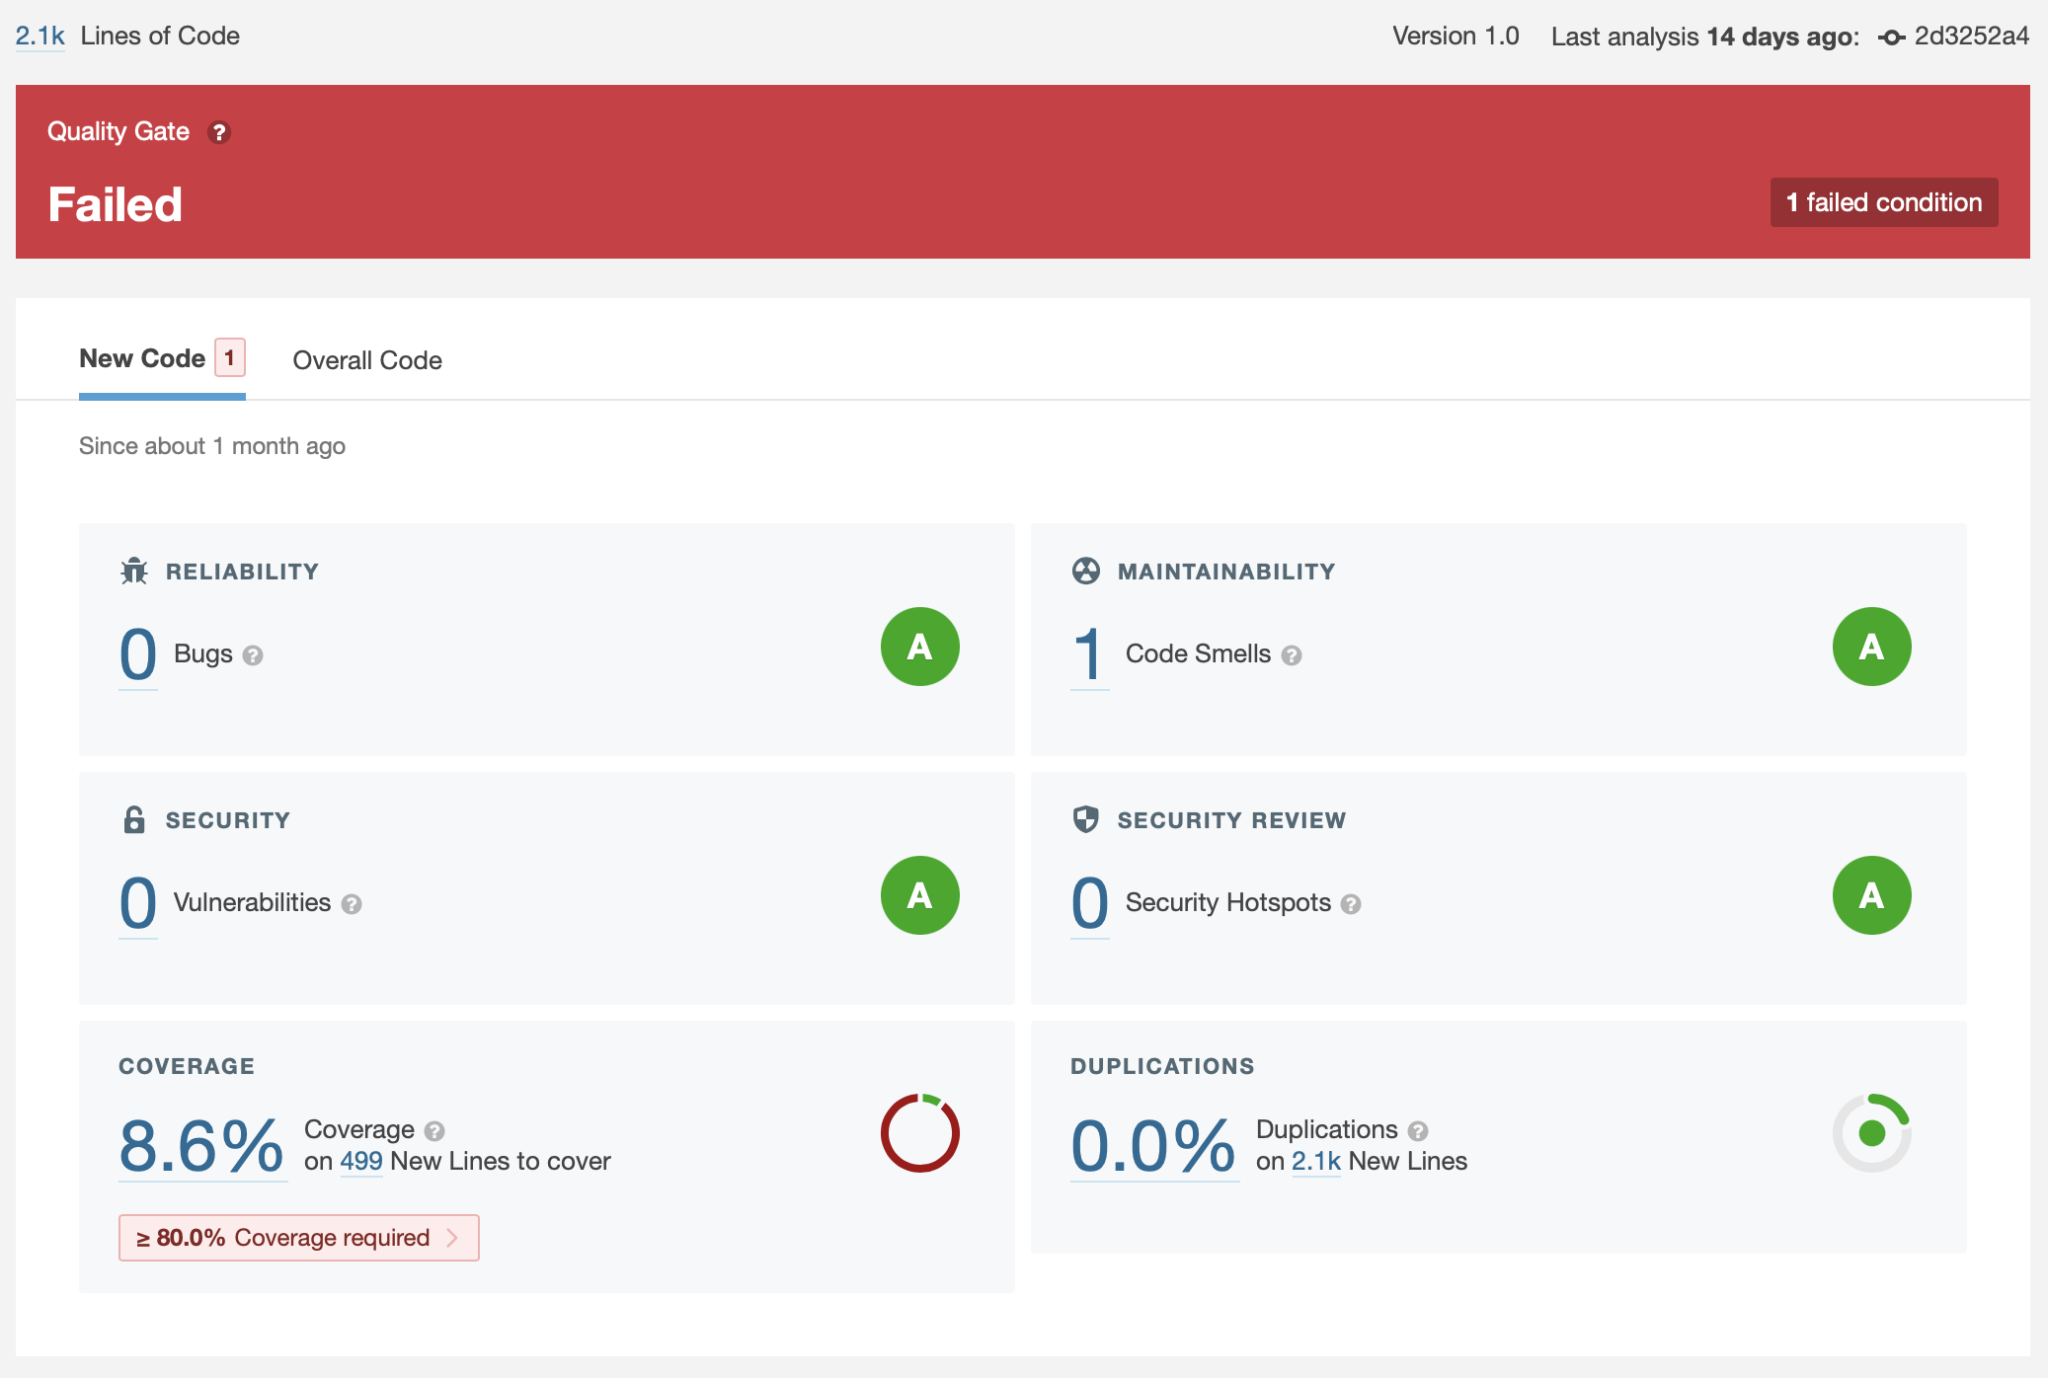 SonarQube report. 2.1k lines of code. Version 1, last analysis 14 days ago. Commit ID 2d3252a4. Quality Gate: Failed. 1 Failed Condition. New Code, since about 1 month ago. Reliability: 0 bugs. Maintainability: 1 code smell. Security: 0 vulnerabilities. Security Review: 0 security hotspots. Coverage: 8.6% coverage on 499 new lines to cover. Duplications 0.0% duplications on 2.1k new lines.